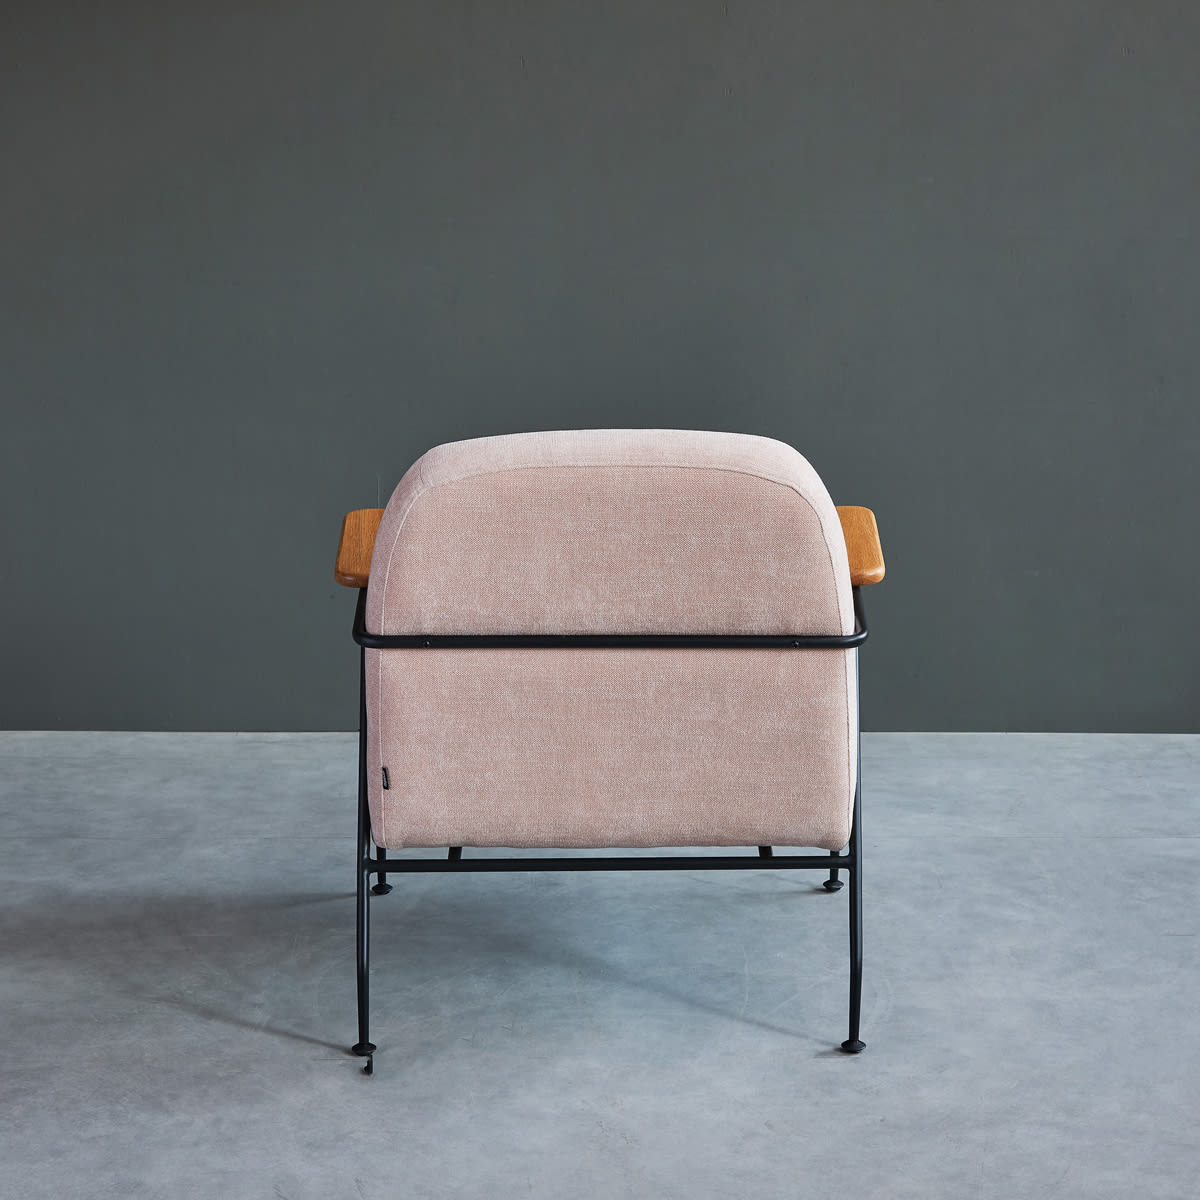 Puffy Lounge Chair With Arm - Dusk Silex 87 - Styled Image by Grado